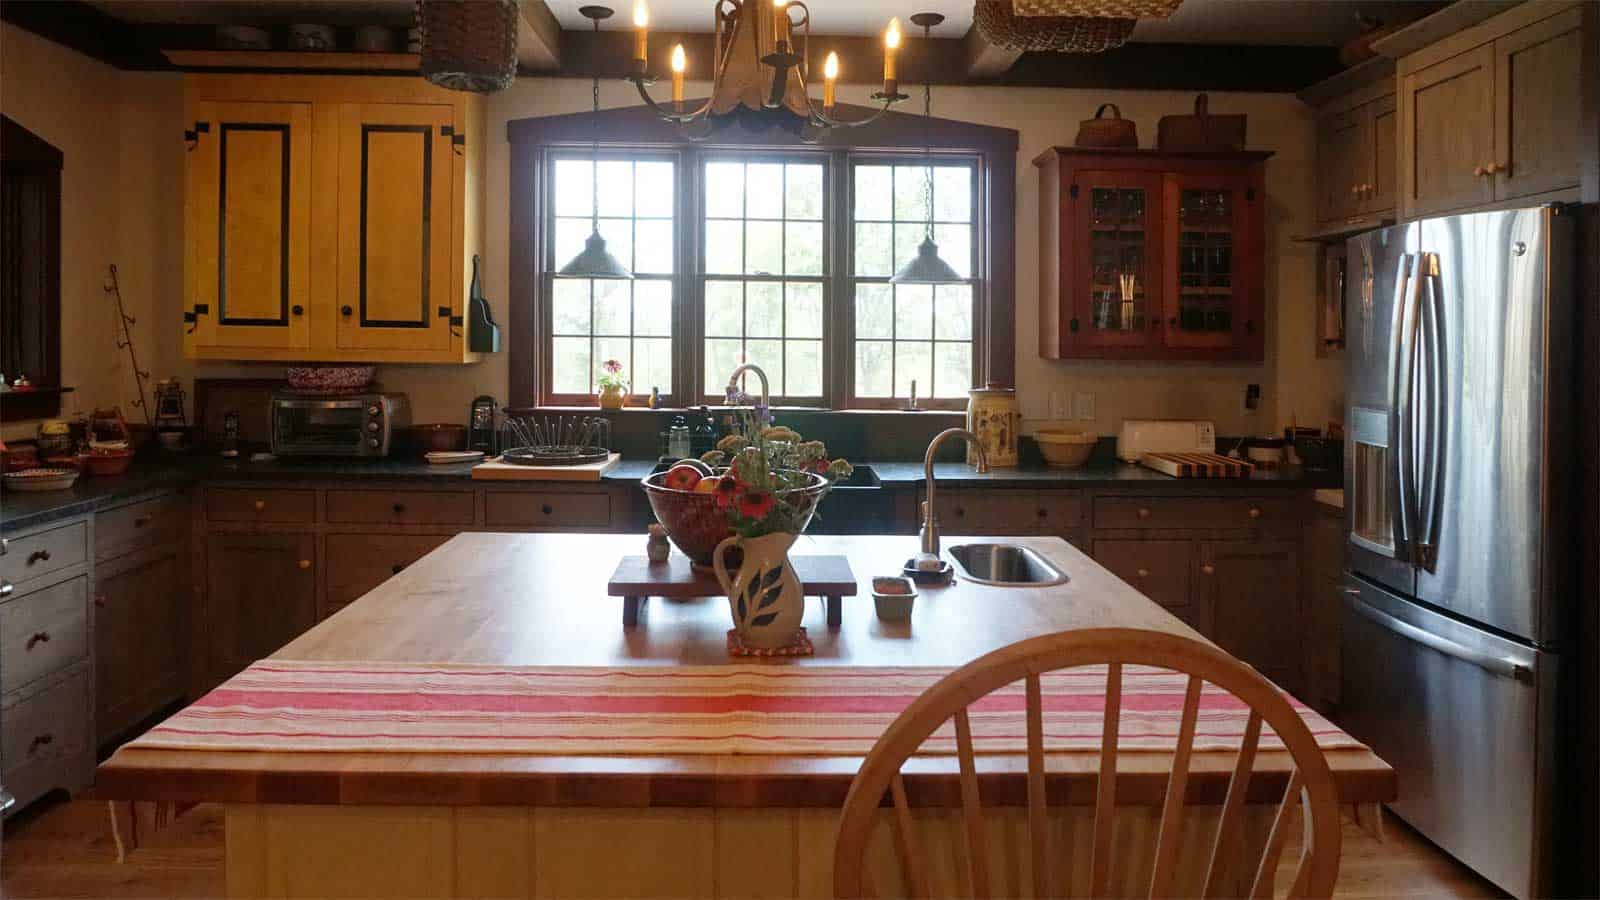 Early American inspired Appomattox kitchen with custom antique modeled cabinets and large center island